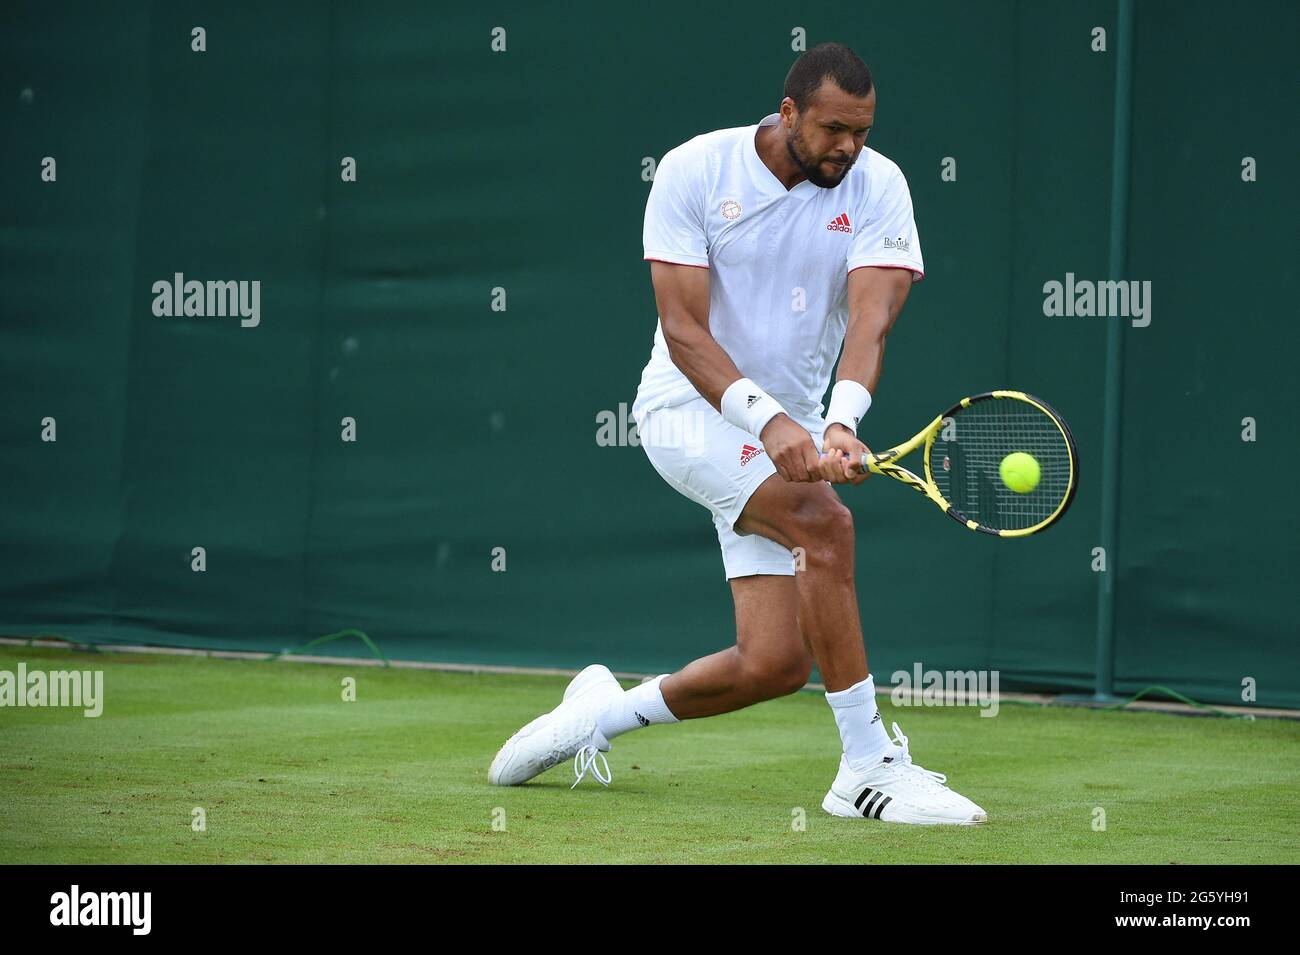 London, UK. 30th June, 2021. Jo-Wilfried Tsonga (FRA) during his first  round match at the 2021 Wimbledon Championships at the AELTC in London, UK,  June 30, 2021. Photo by Corinne Dubreuil/ABACAPRESS.COM Credit: